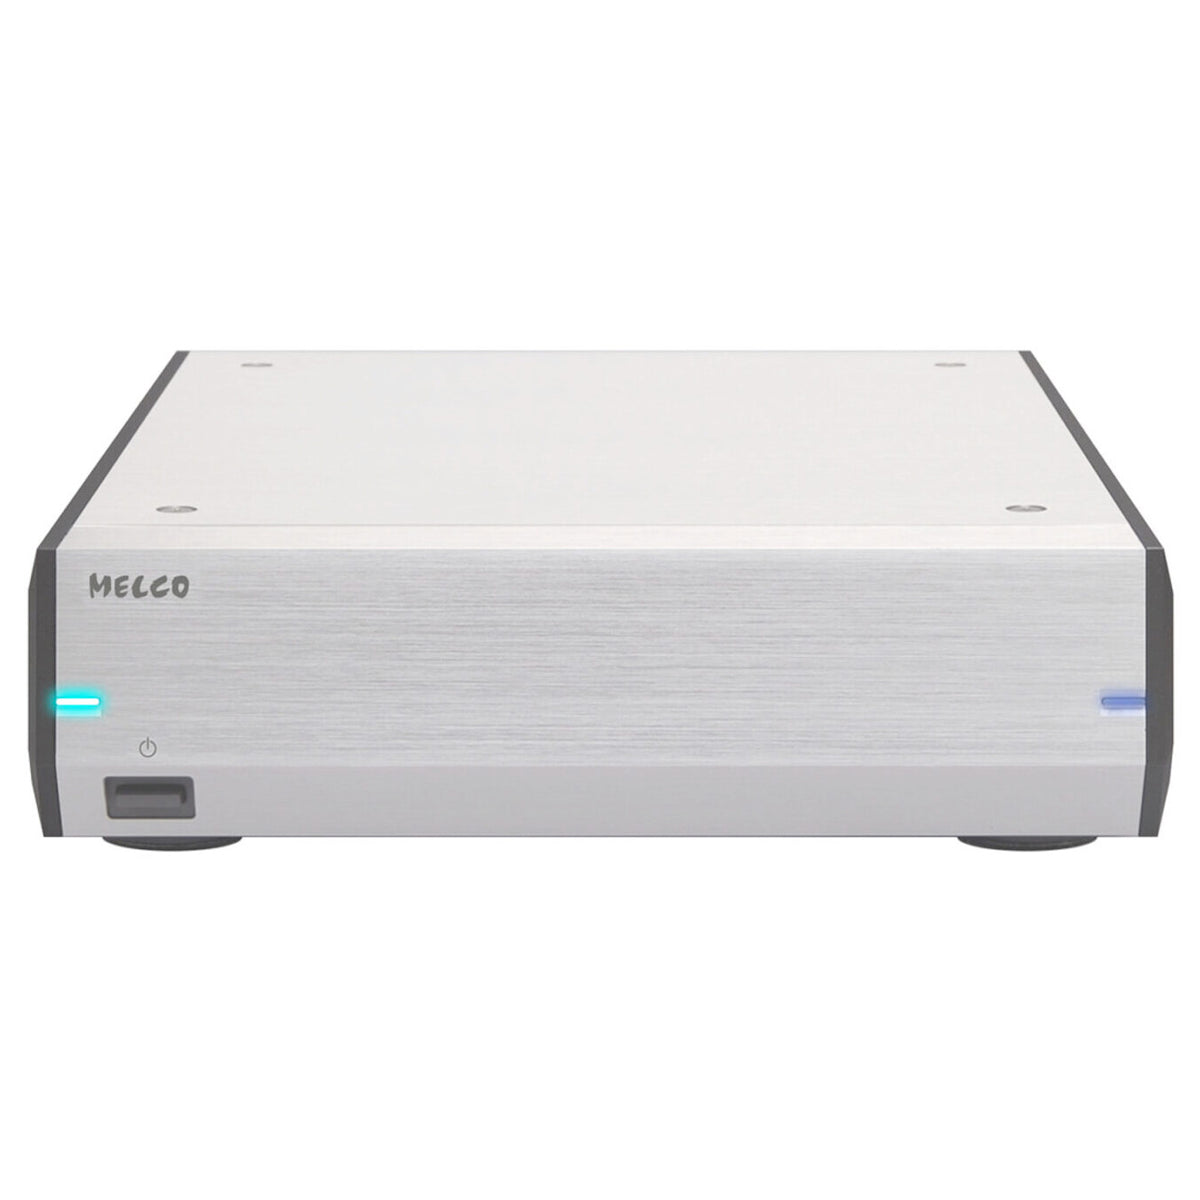 Melco E100 H-30 Audiophile Hard Drive - Silver (only 1 left)